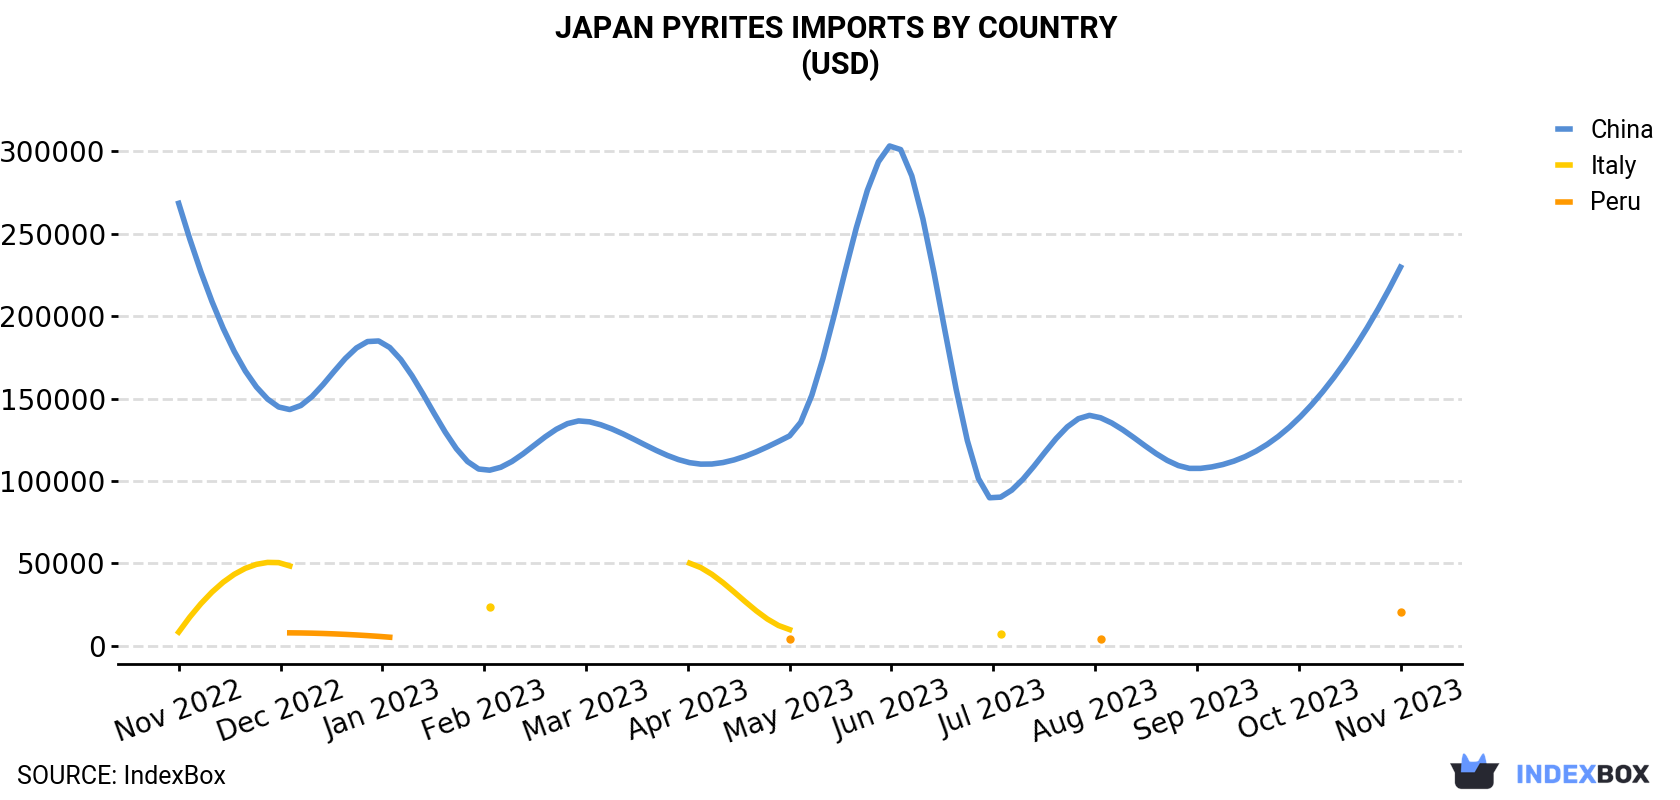 Japan Pyrites Imports By Country (Thousand USD)